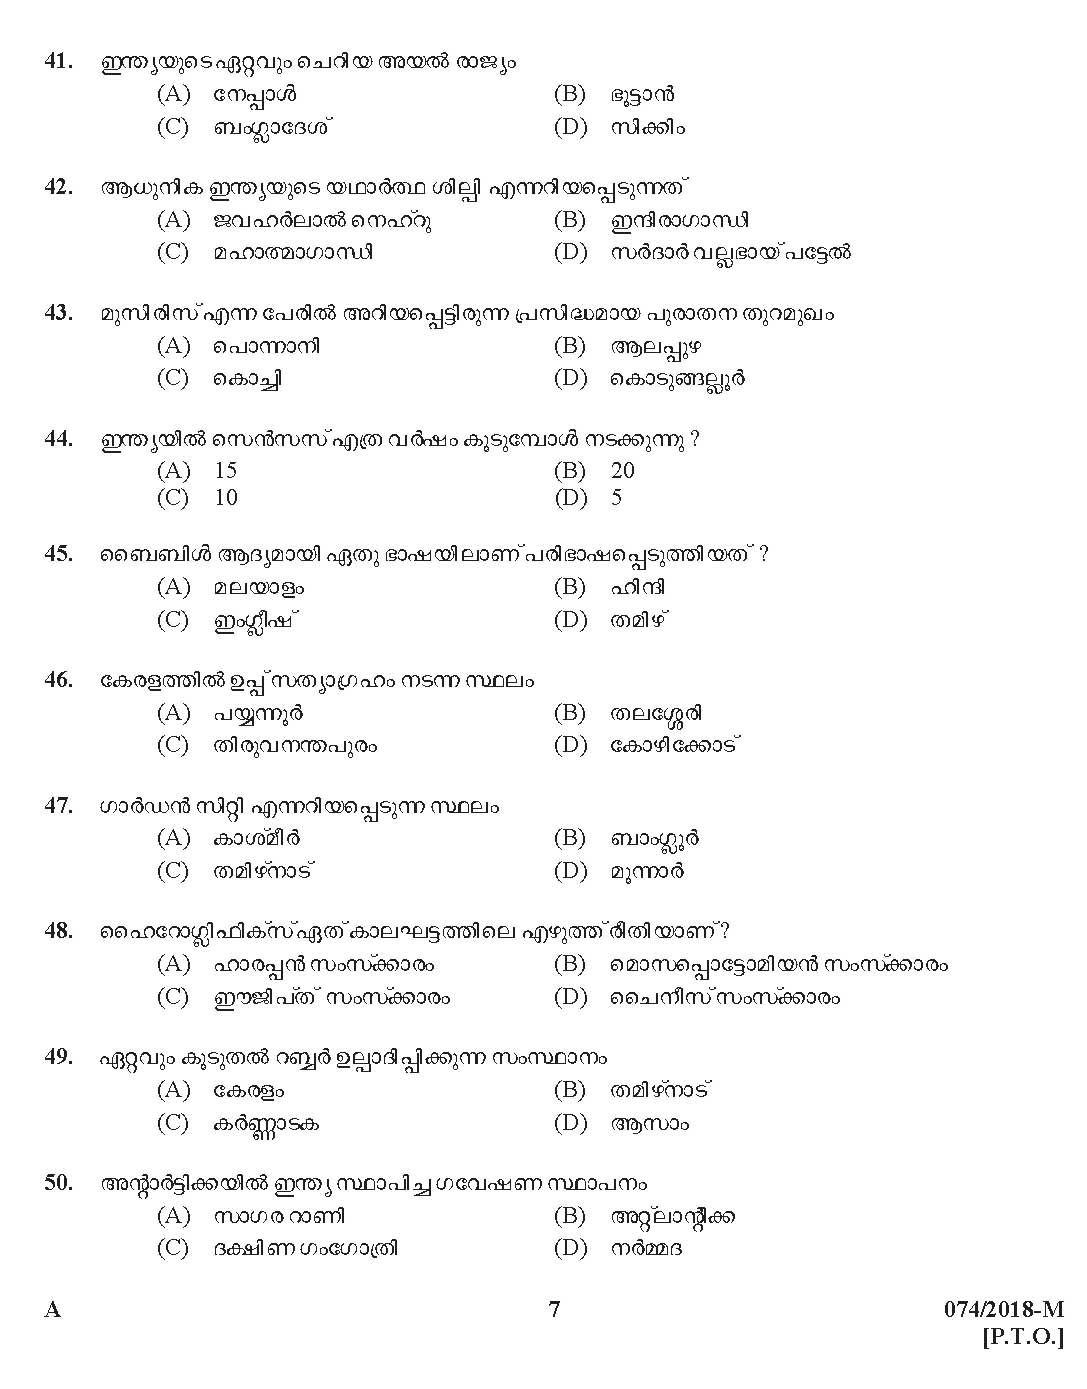 Kerala PSC Police Constable Driver Exam 2018 Question Paper Code 0742018 M 6